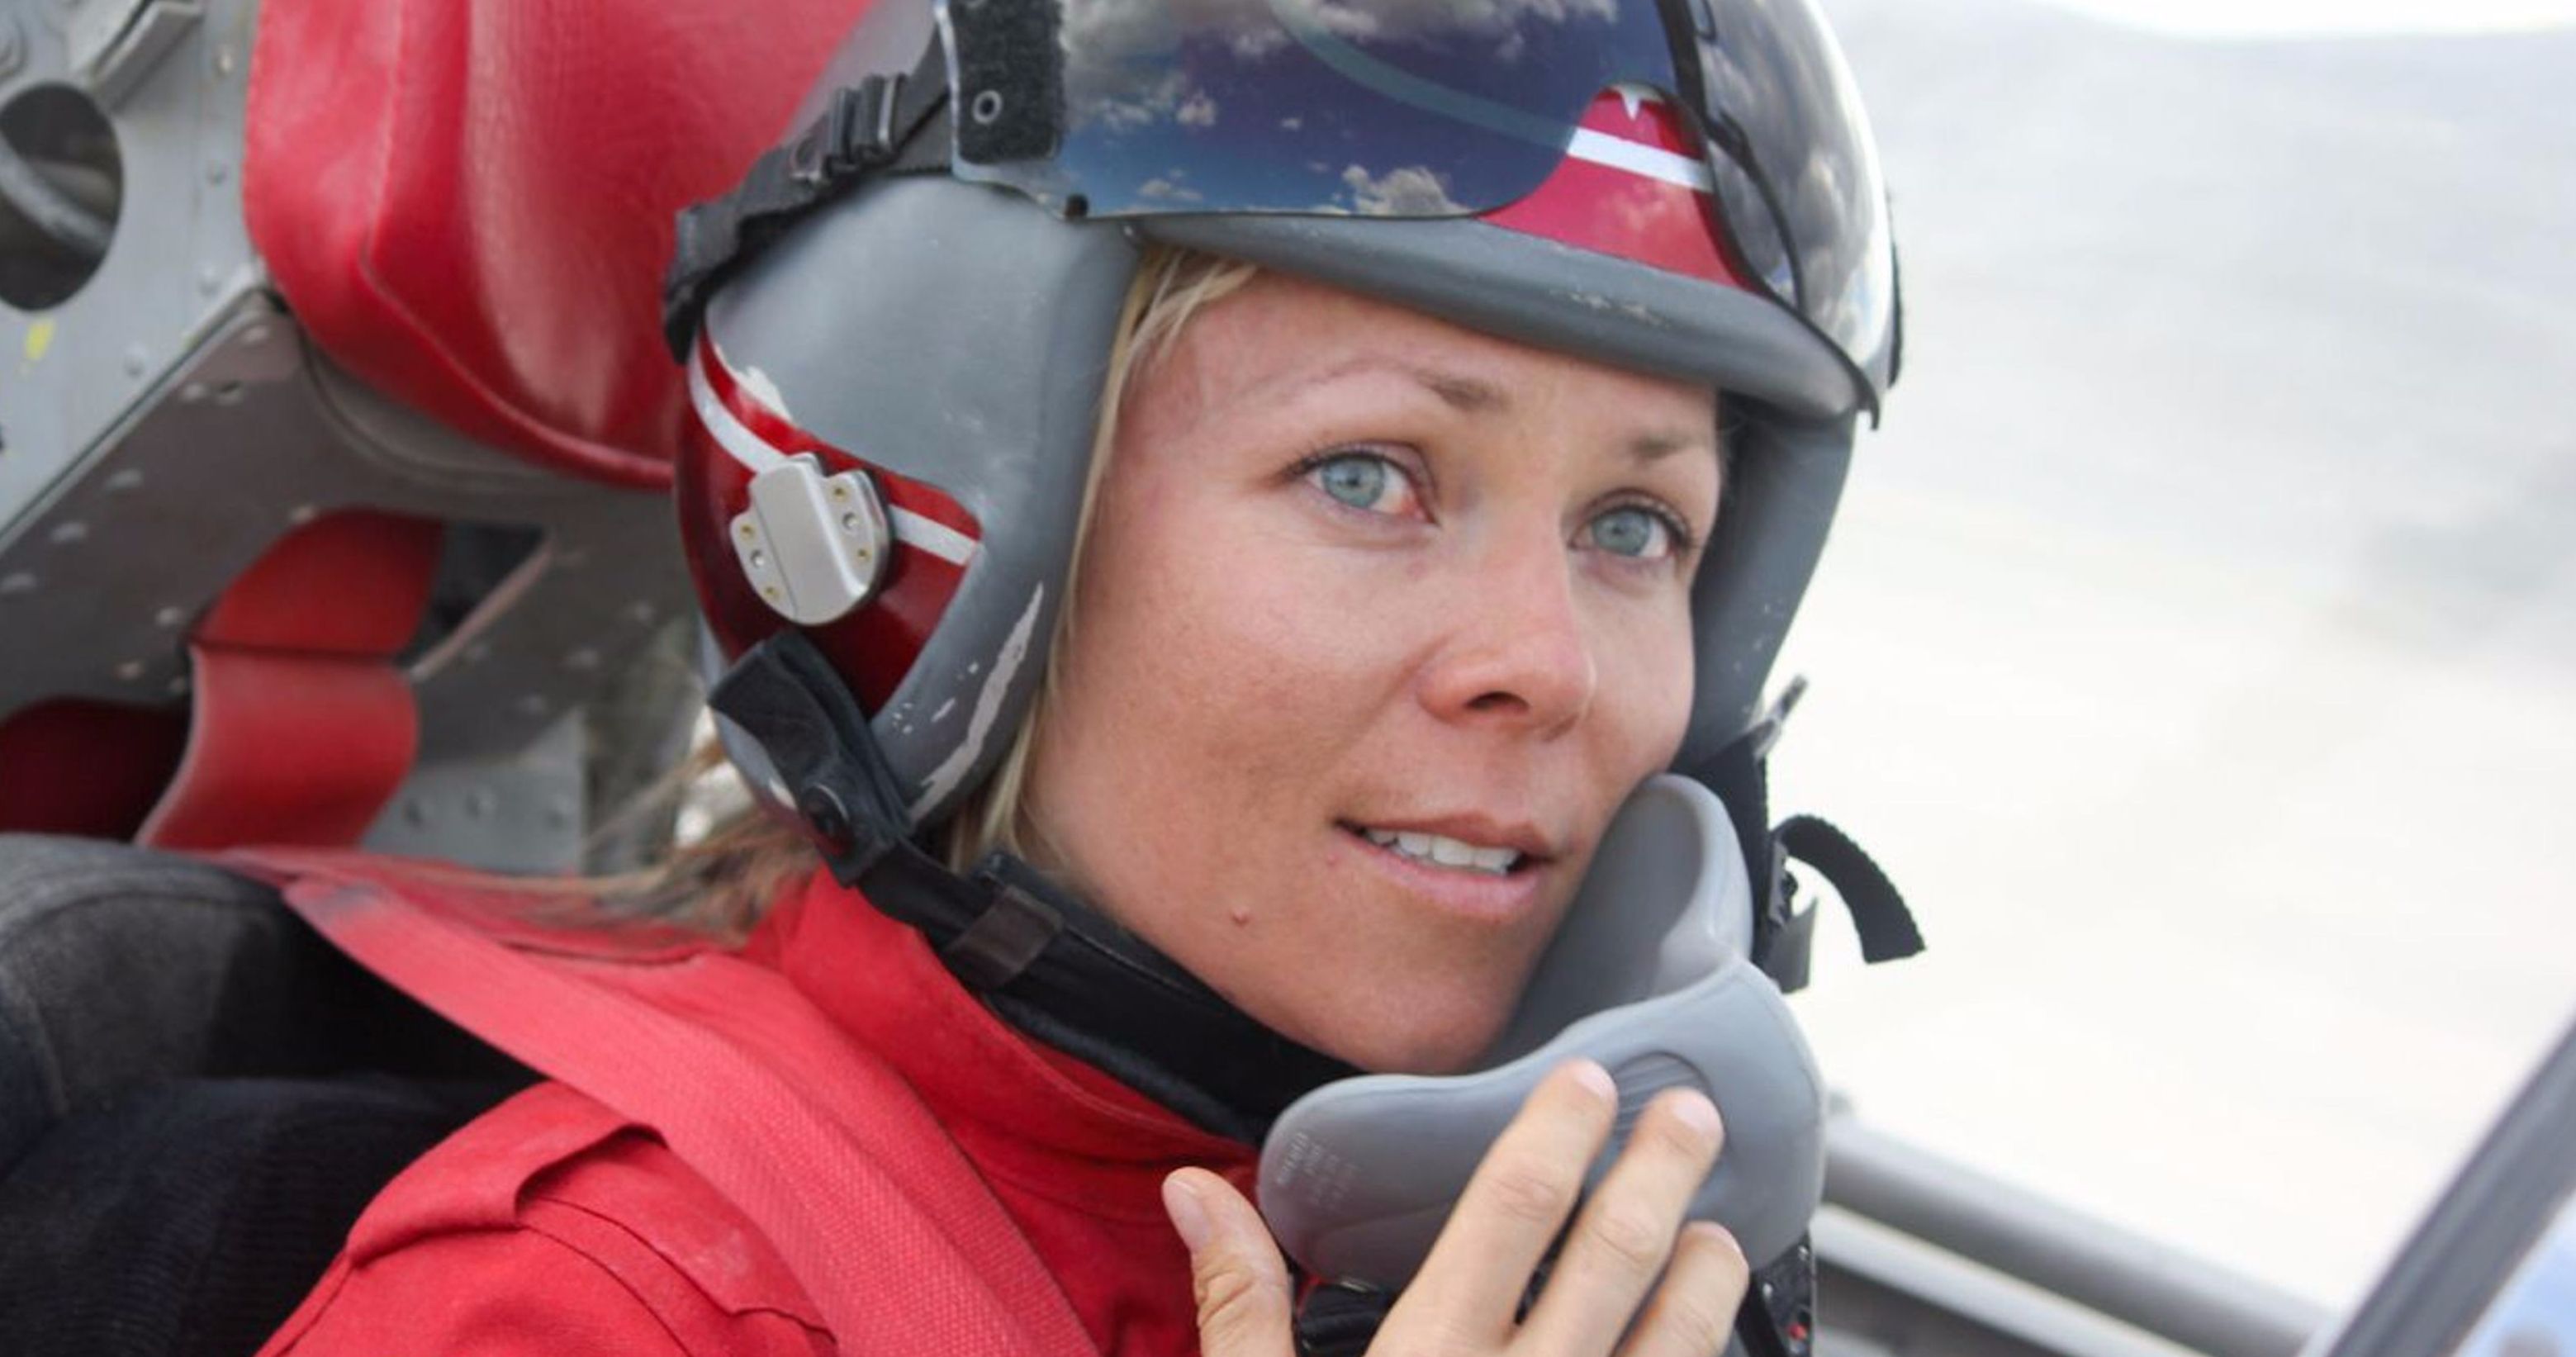 Jessi Combs, Fastest Woman on Four Wheels, Dies While Trying to Break Land Speed Record